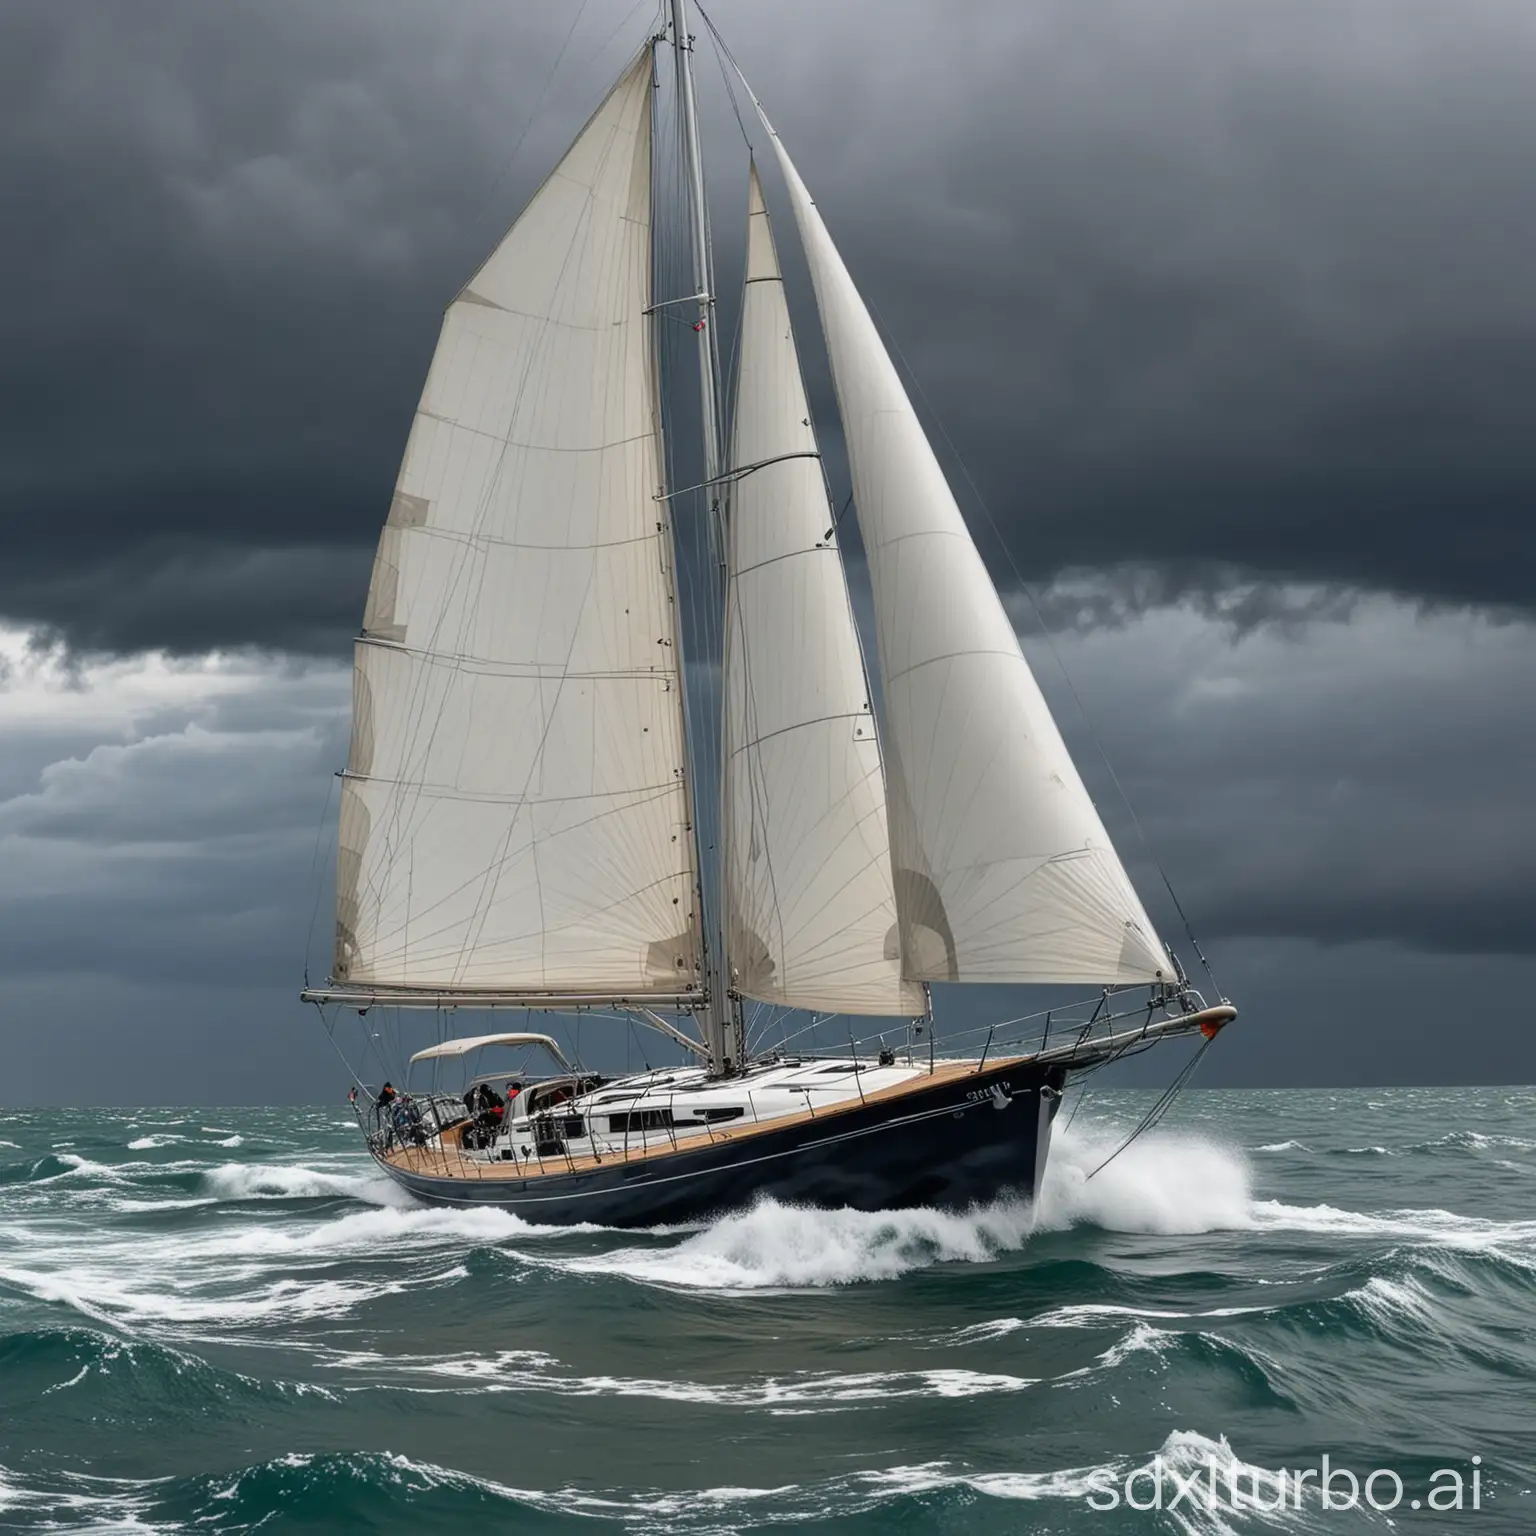 Intrepid-Sailing-A-54Foot-Yacht-Confronts-the-Stormy-Seas